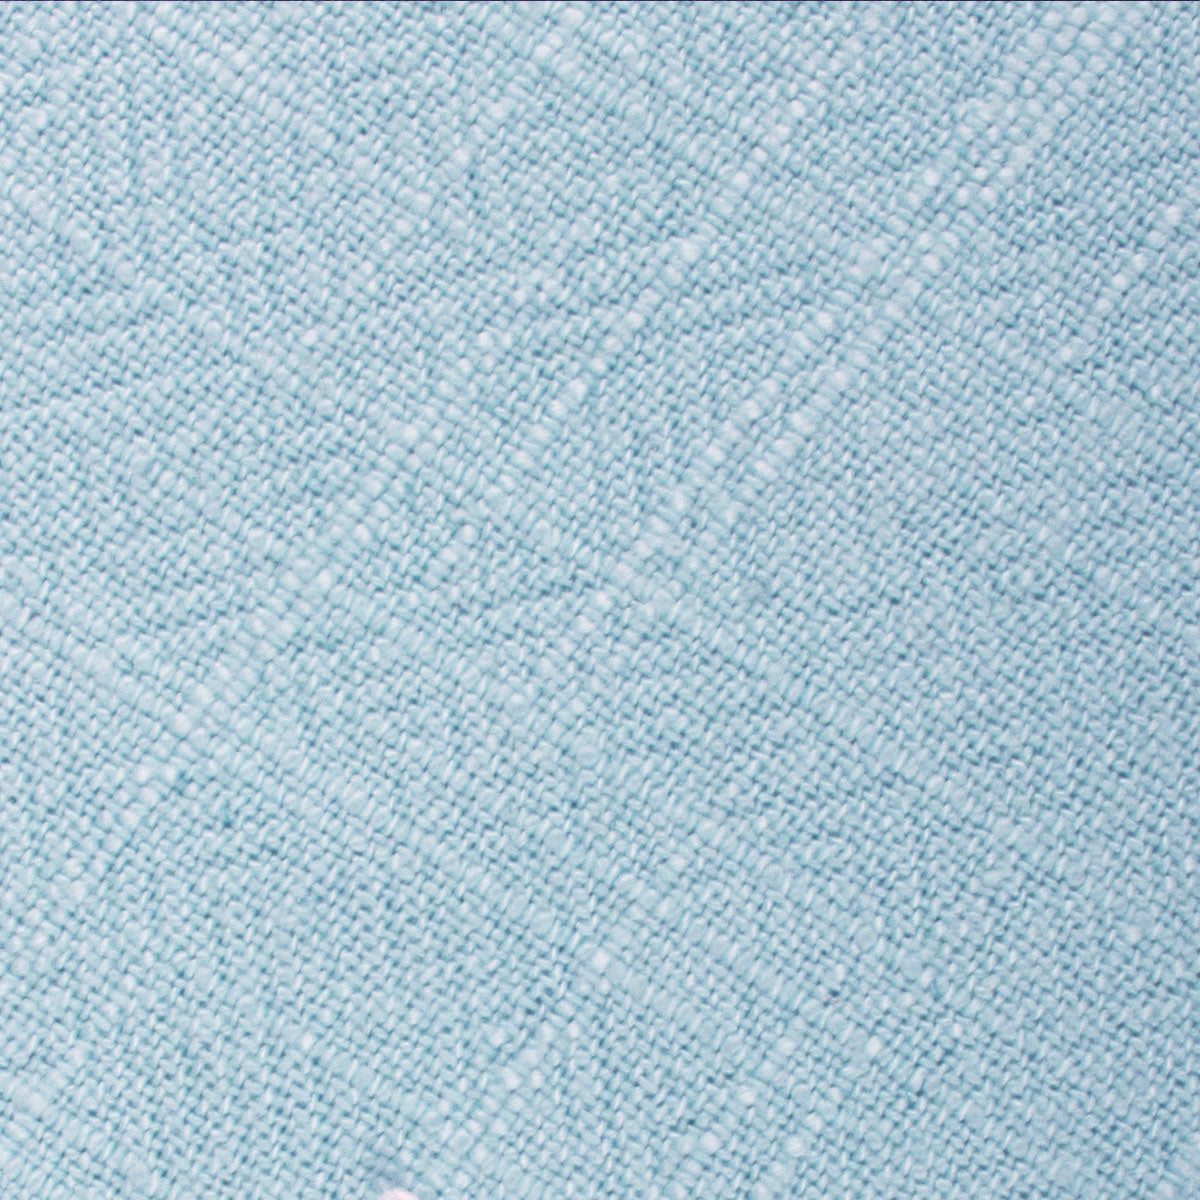 Argentinian Ice Blue Linen Fabric Swatch